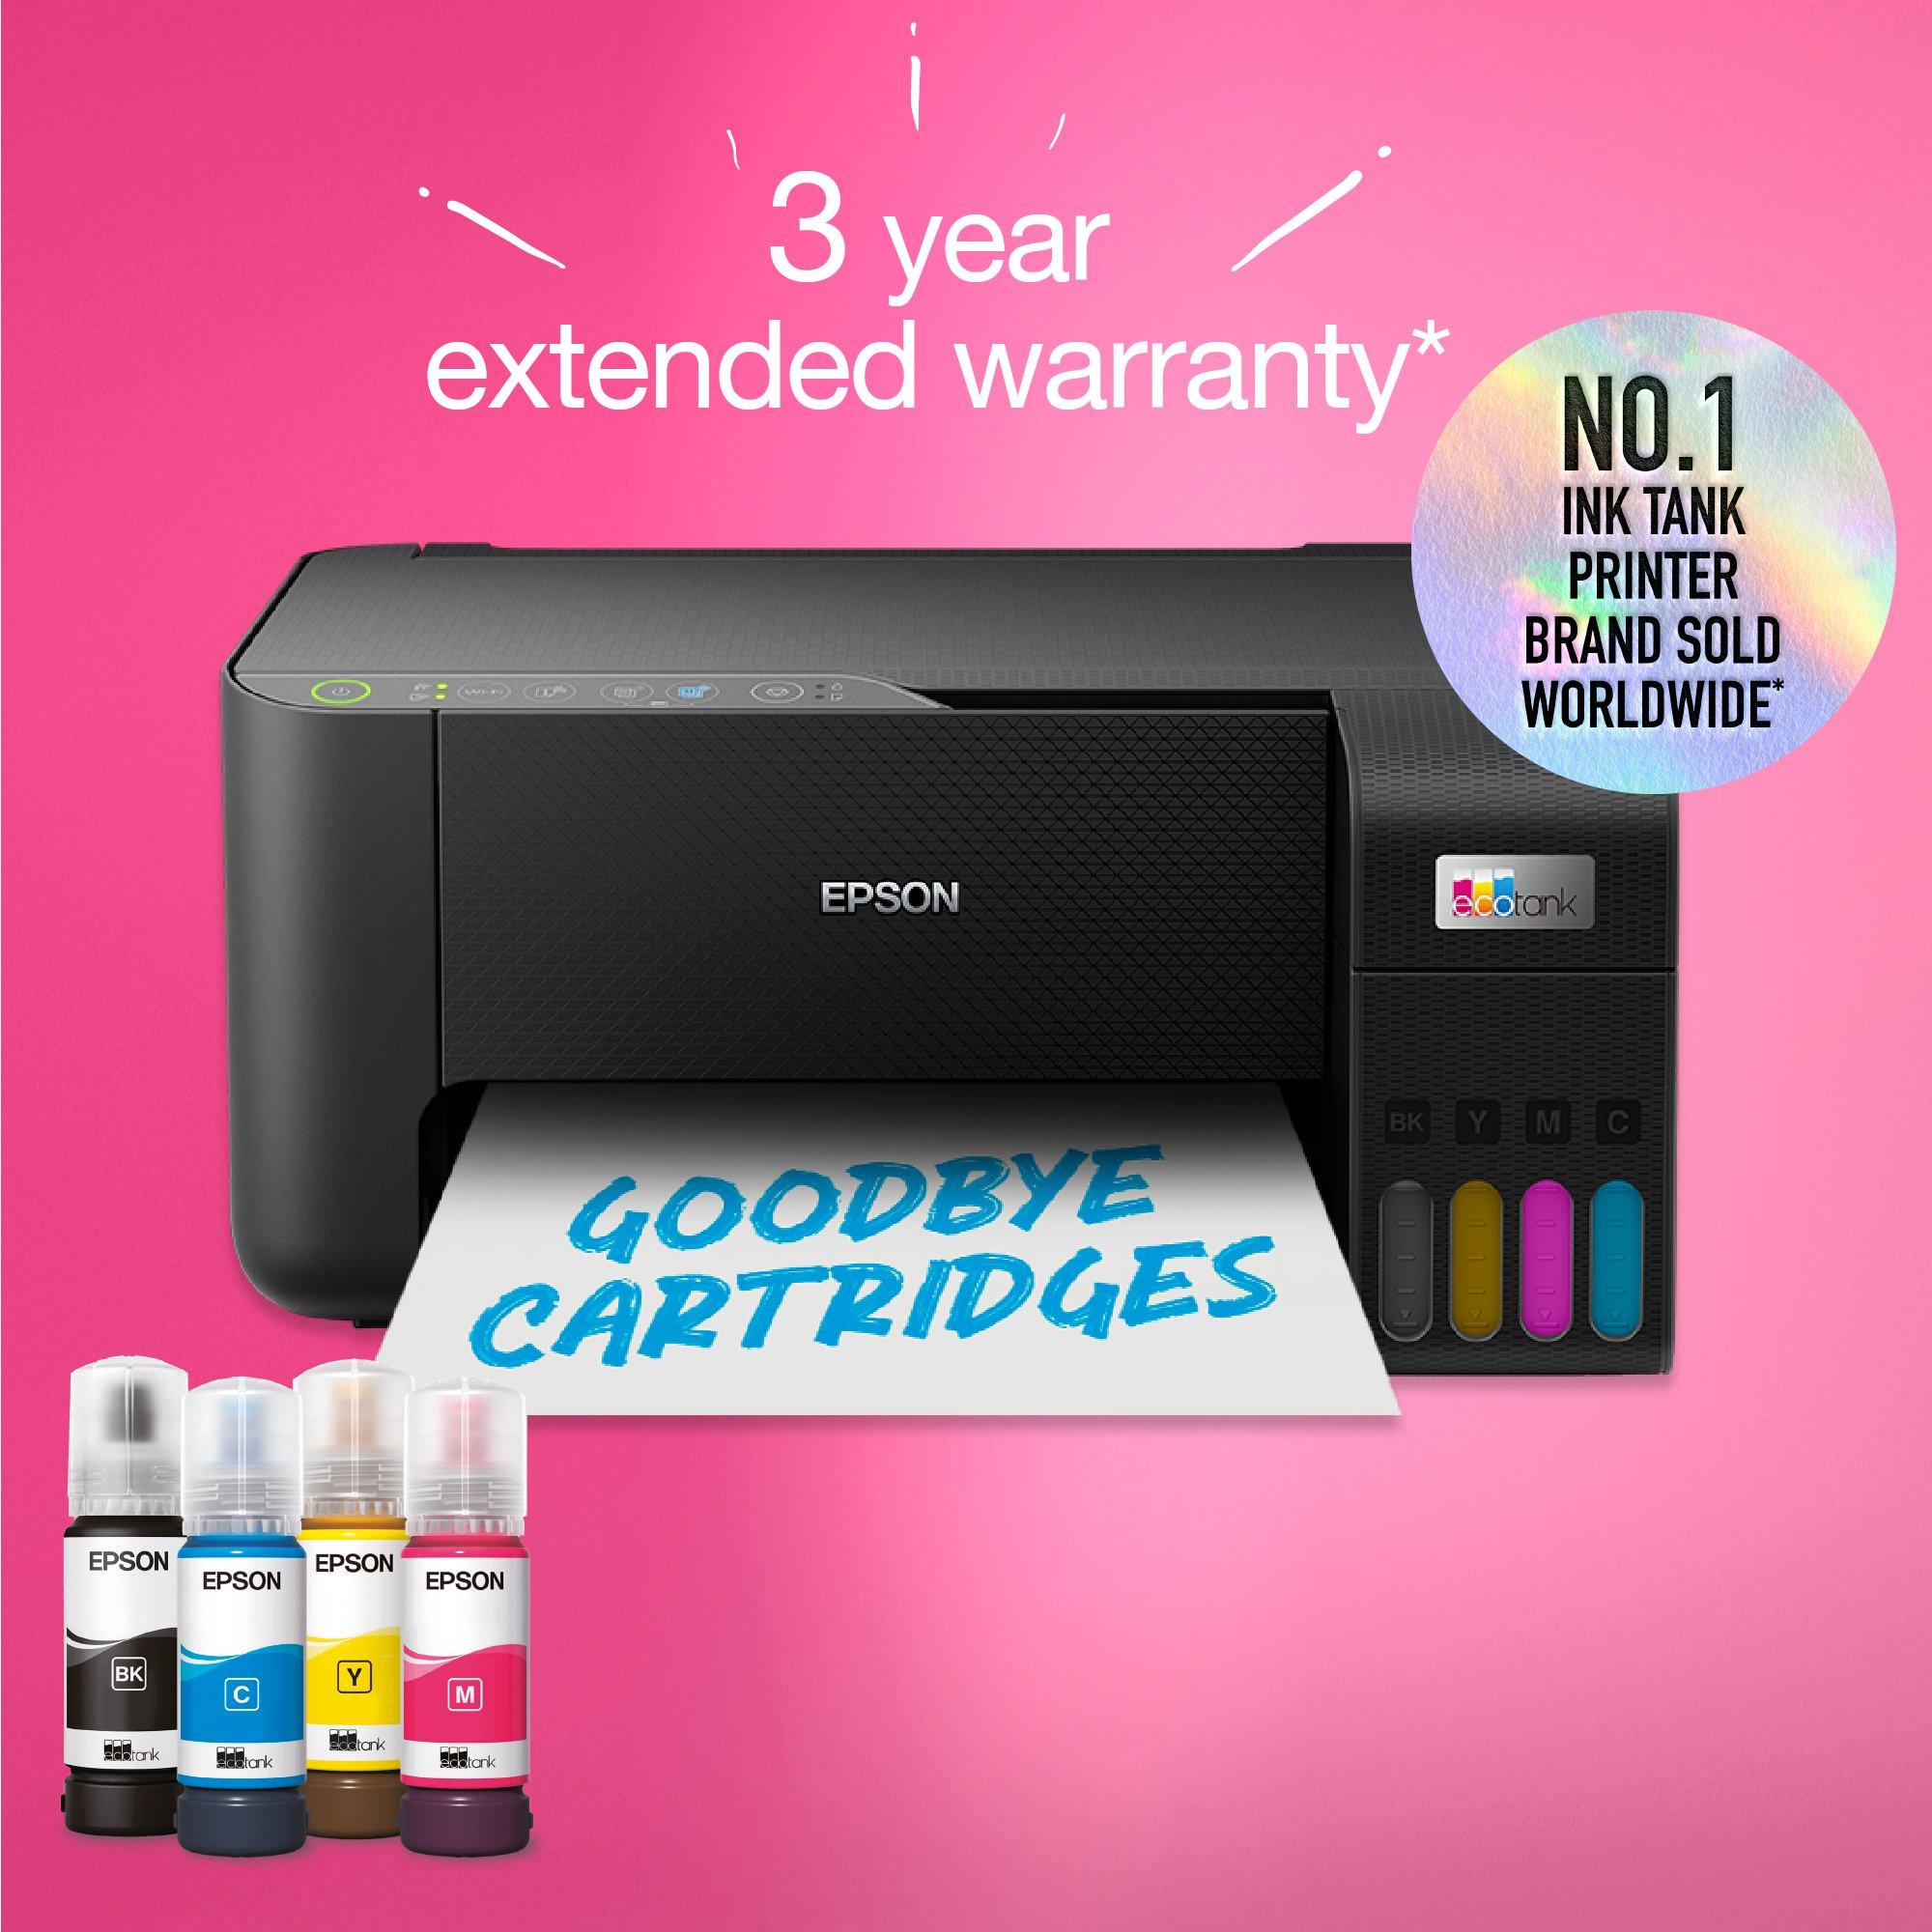 EcoTank ET-2862 A4 Multifunction Wi-Fi Ink Tank Printer, With Up To 3 Years  Of Ink Included